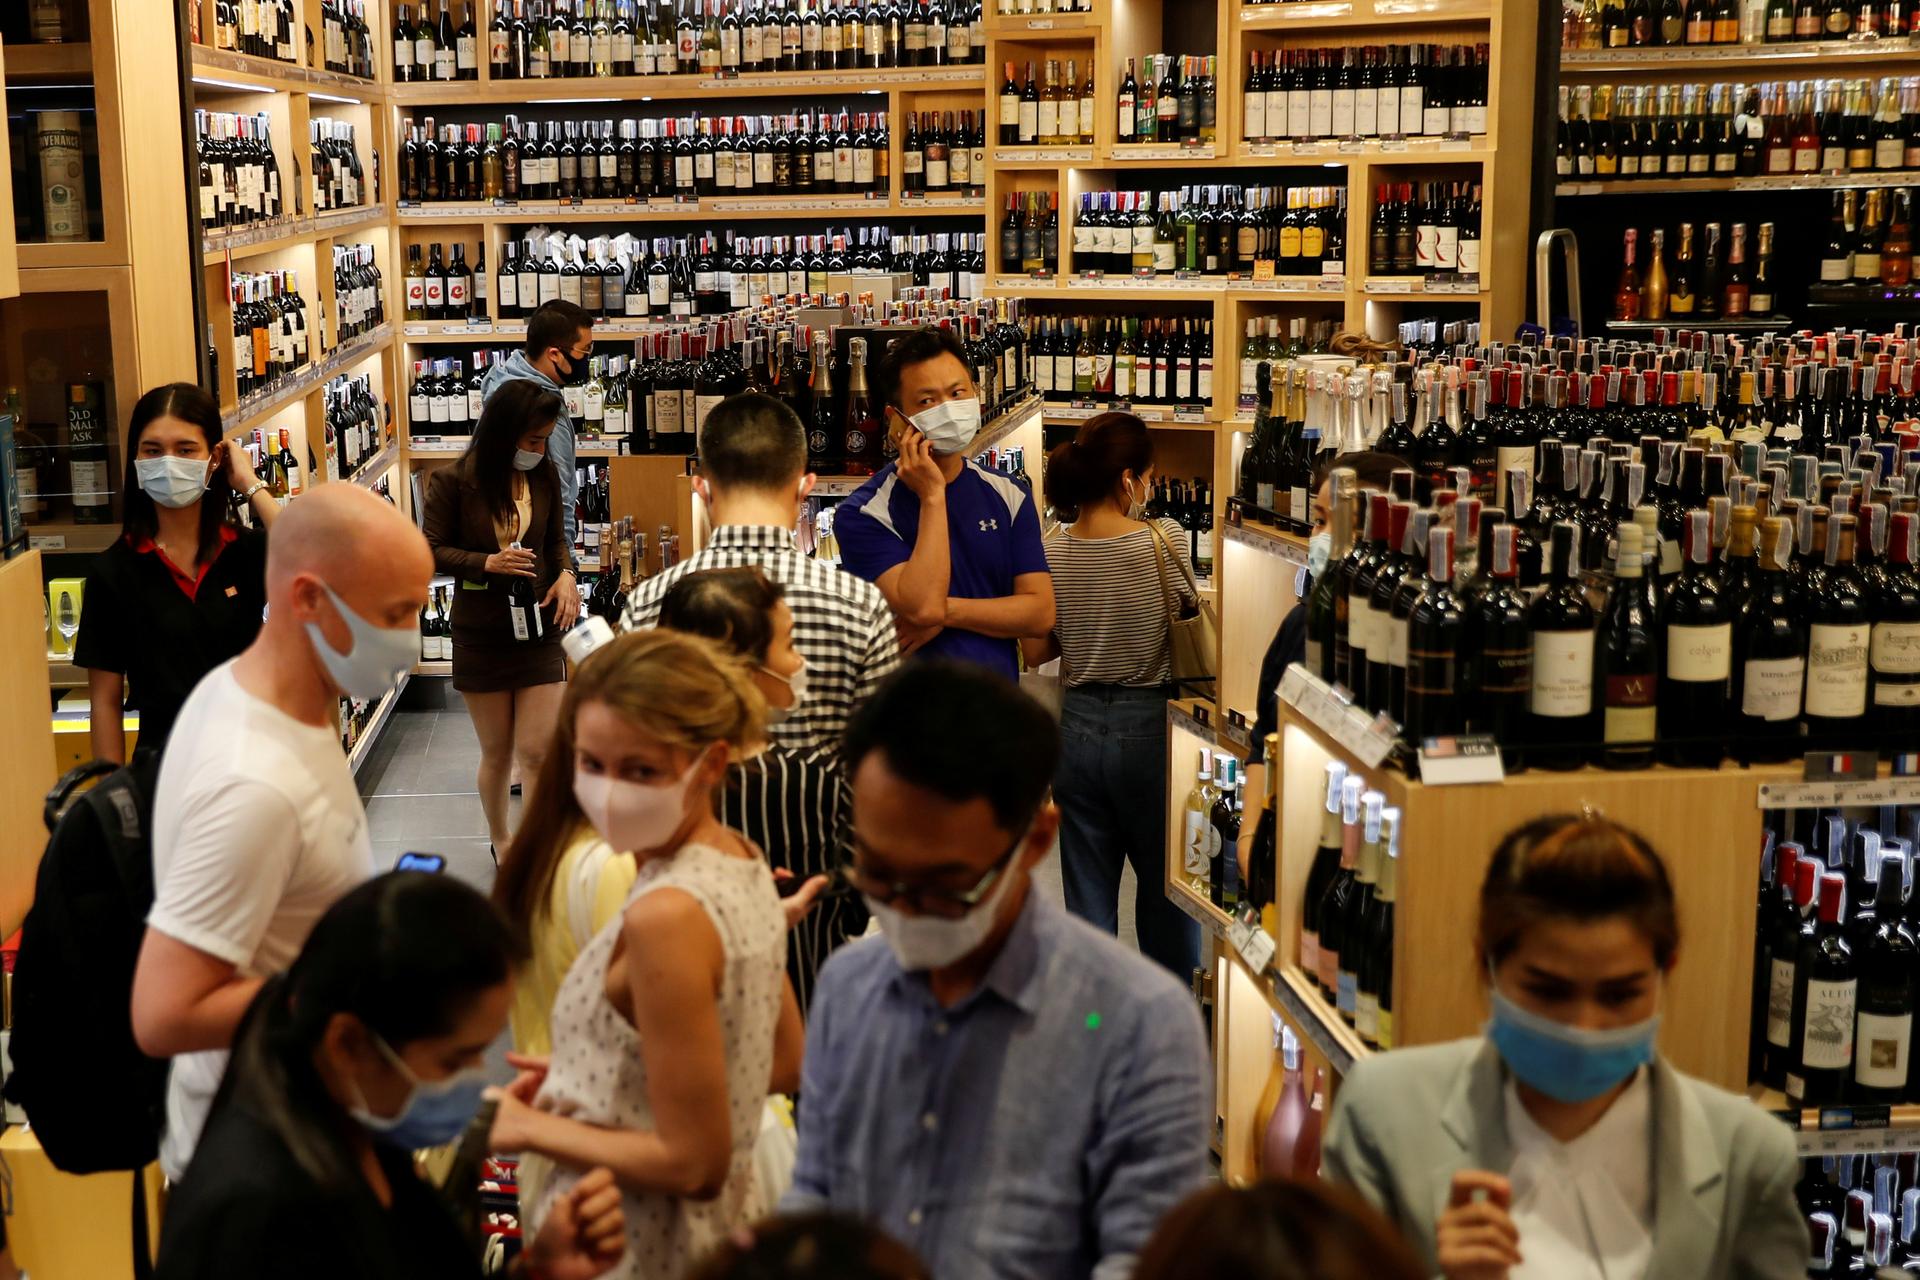 People line up inside a crowded liquor shop after Bangkok and several other provinces announced a 10-day ban on alcohol sale starting April 10 during the coronavirus outbreak in Bangkok, Thailand, April 9, 2020.